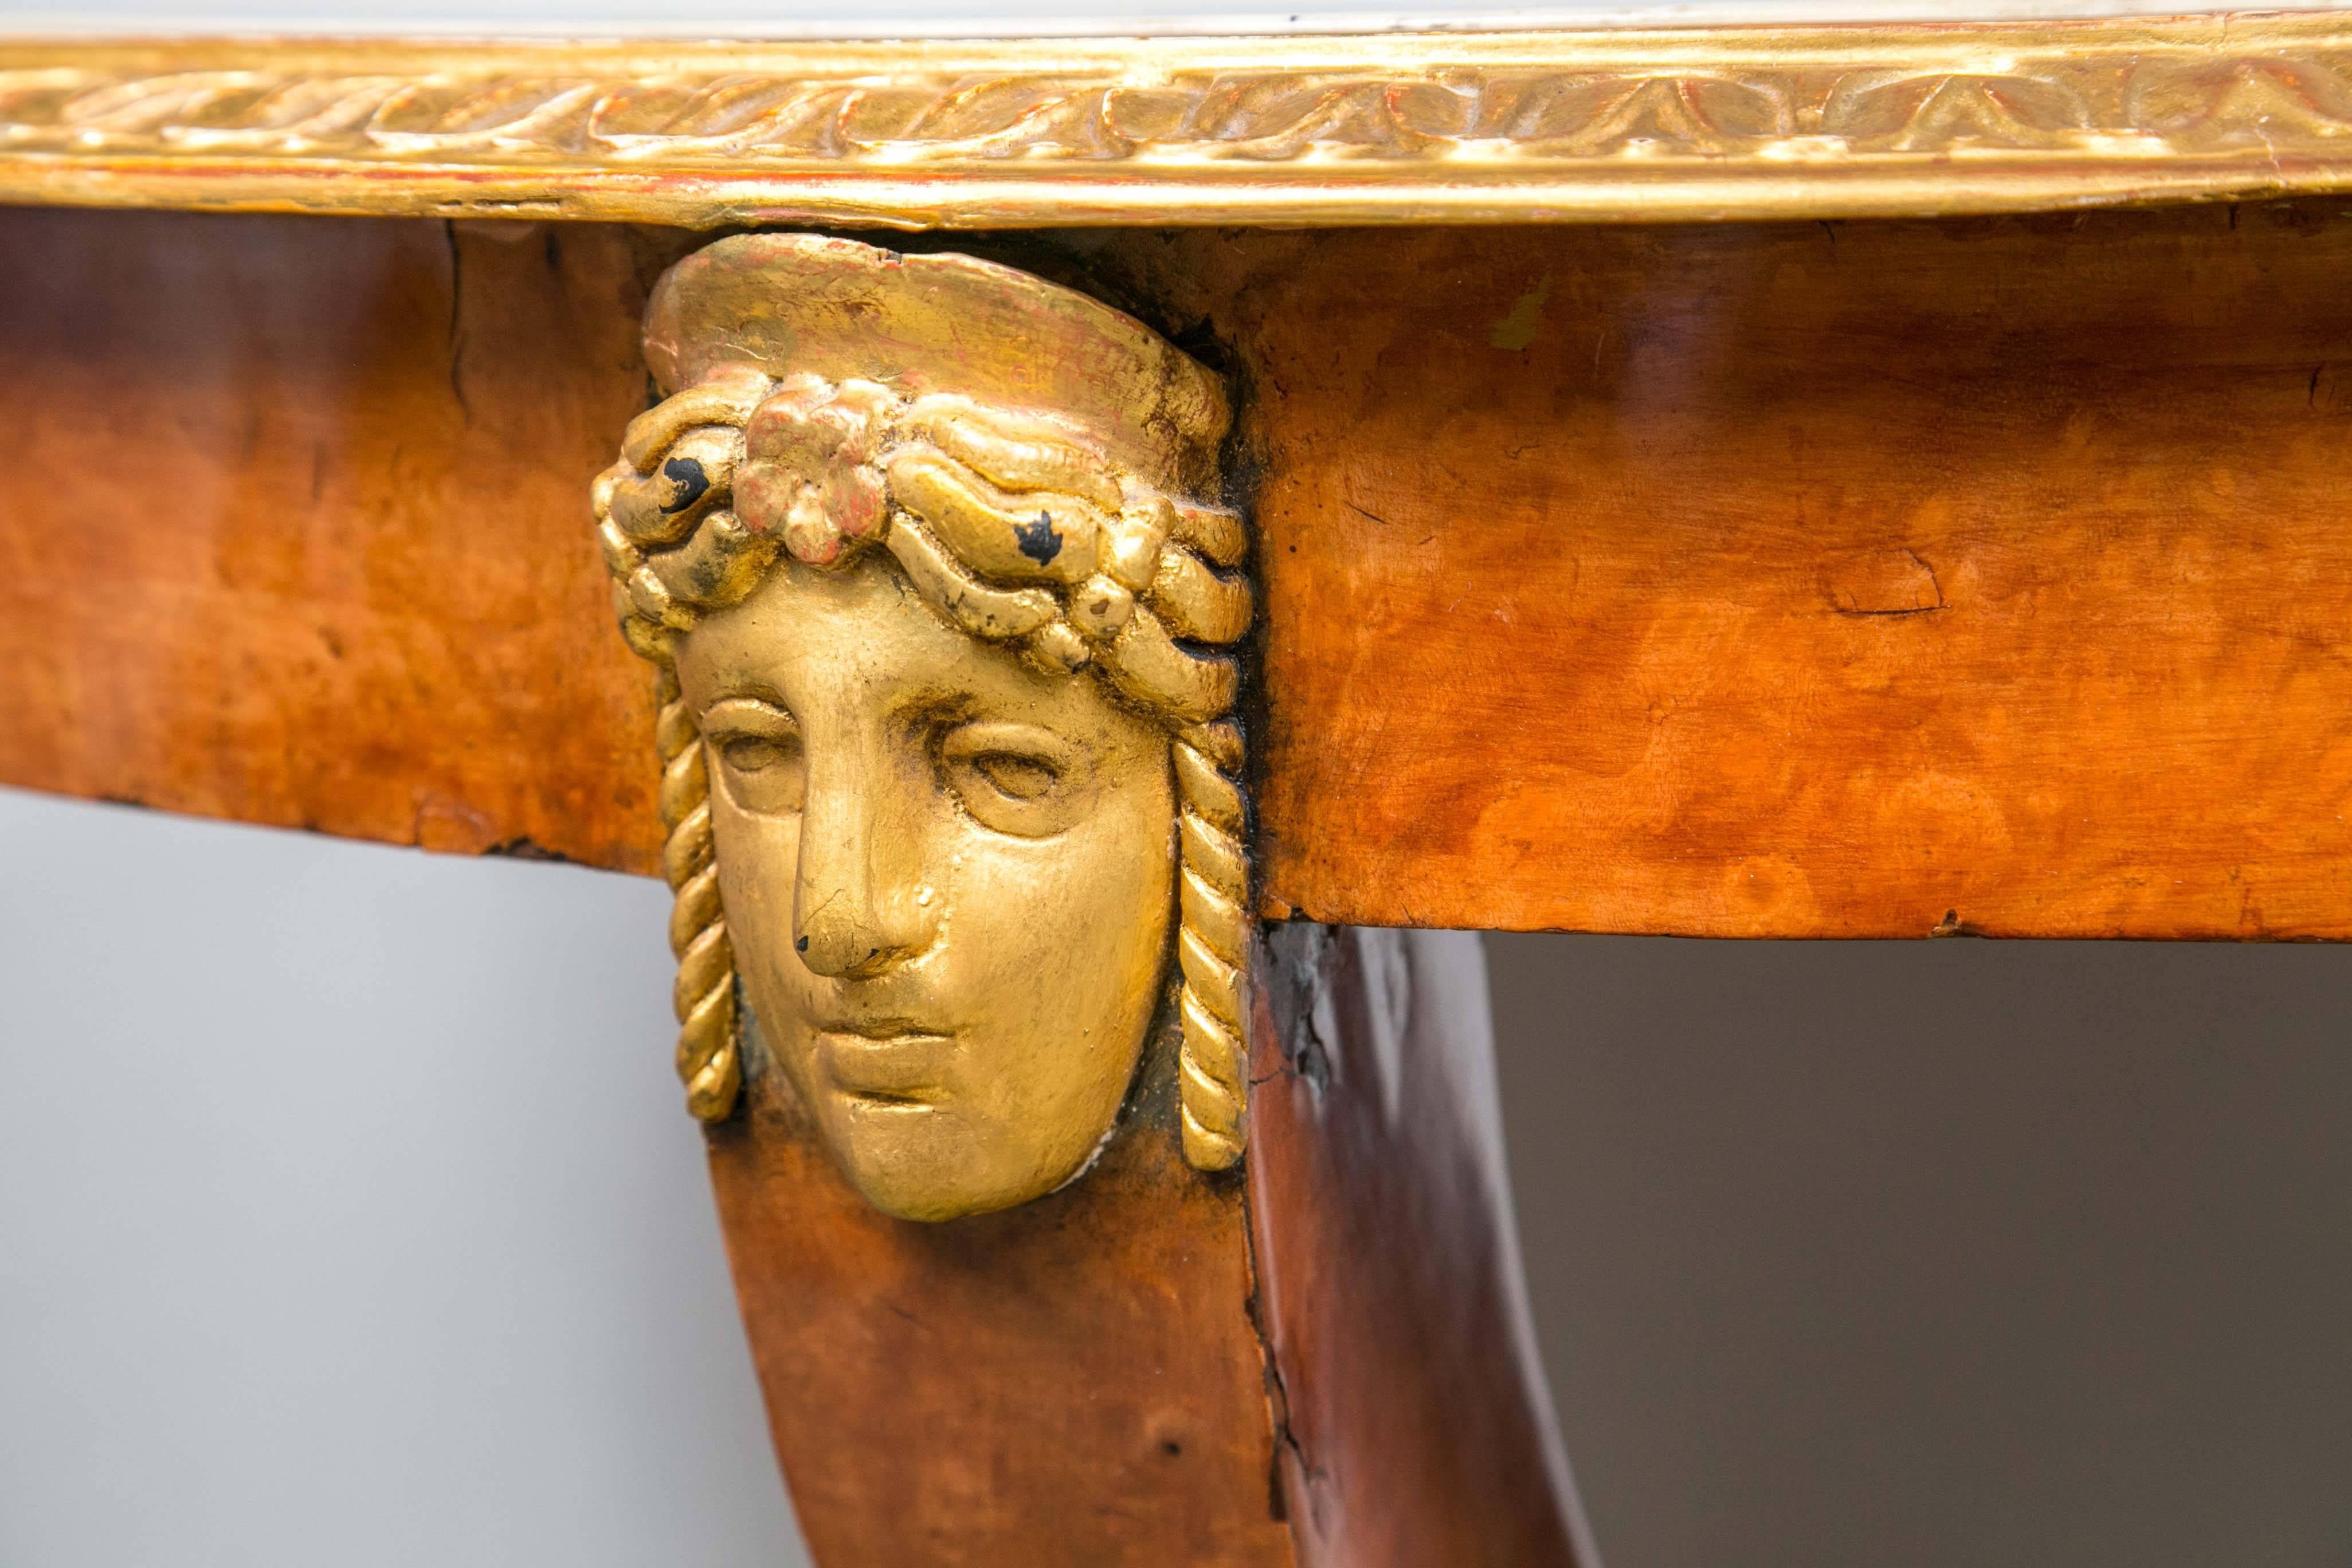 This center table has a marble top that sits within a gilt wood gadrooned rim. The marble is painted with a center of Cupid receiving a laurel wreath from Psyche. It is surrounded by paintings of a frolicking cupid within gilded framing, separated